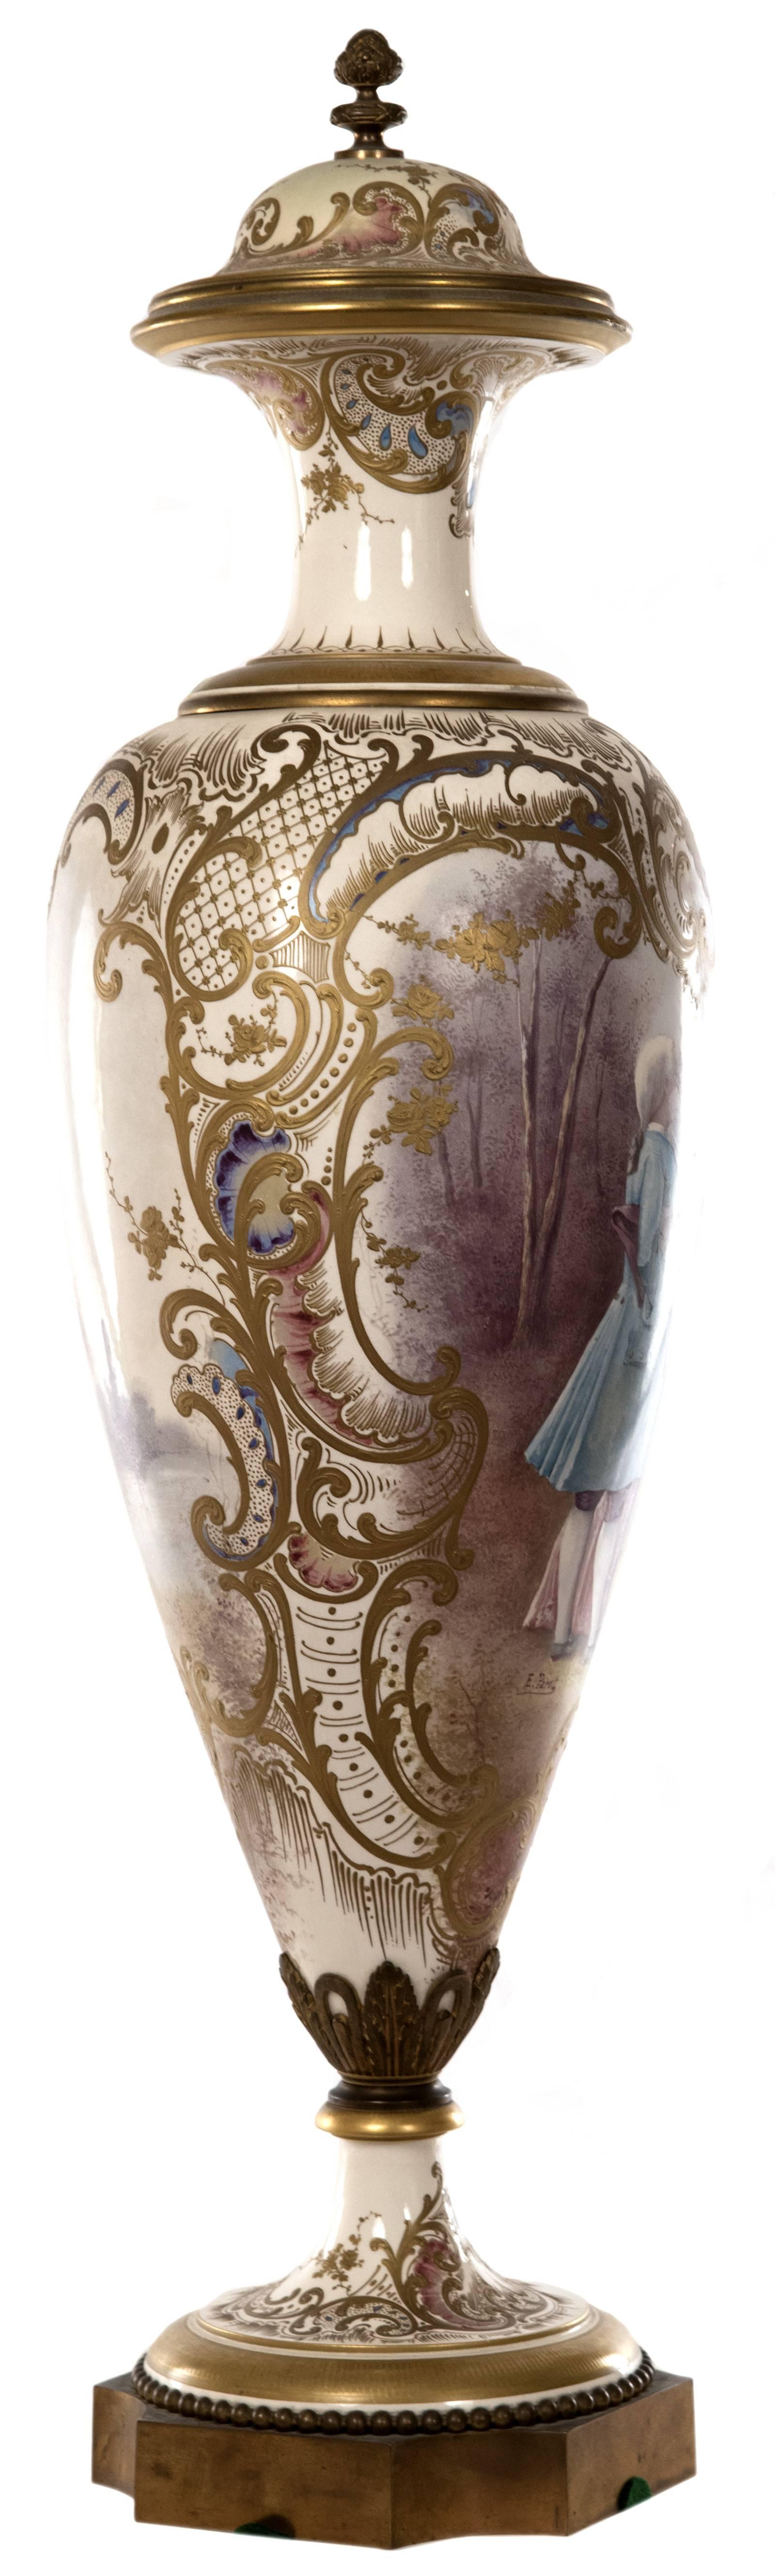 A 19th century French porcelain vase of slim baluster form with slender neck that is decorated with gilded bands and detailed foliate designs, surmounted by a pinecone-shaped finial capping the lid, the tapering and gilt trimmed foot mounted to a